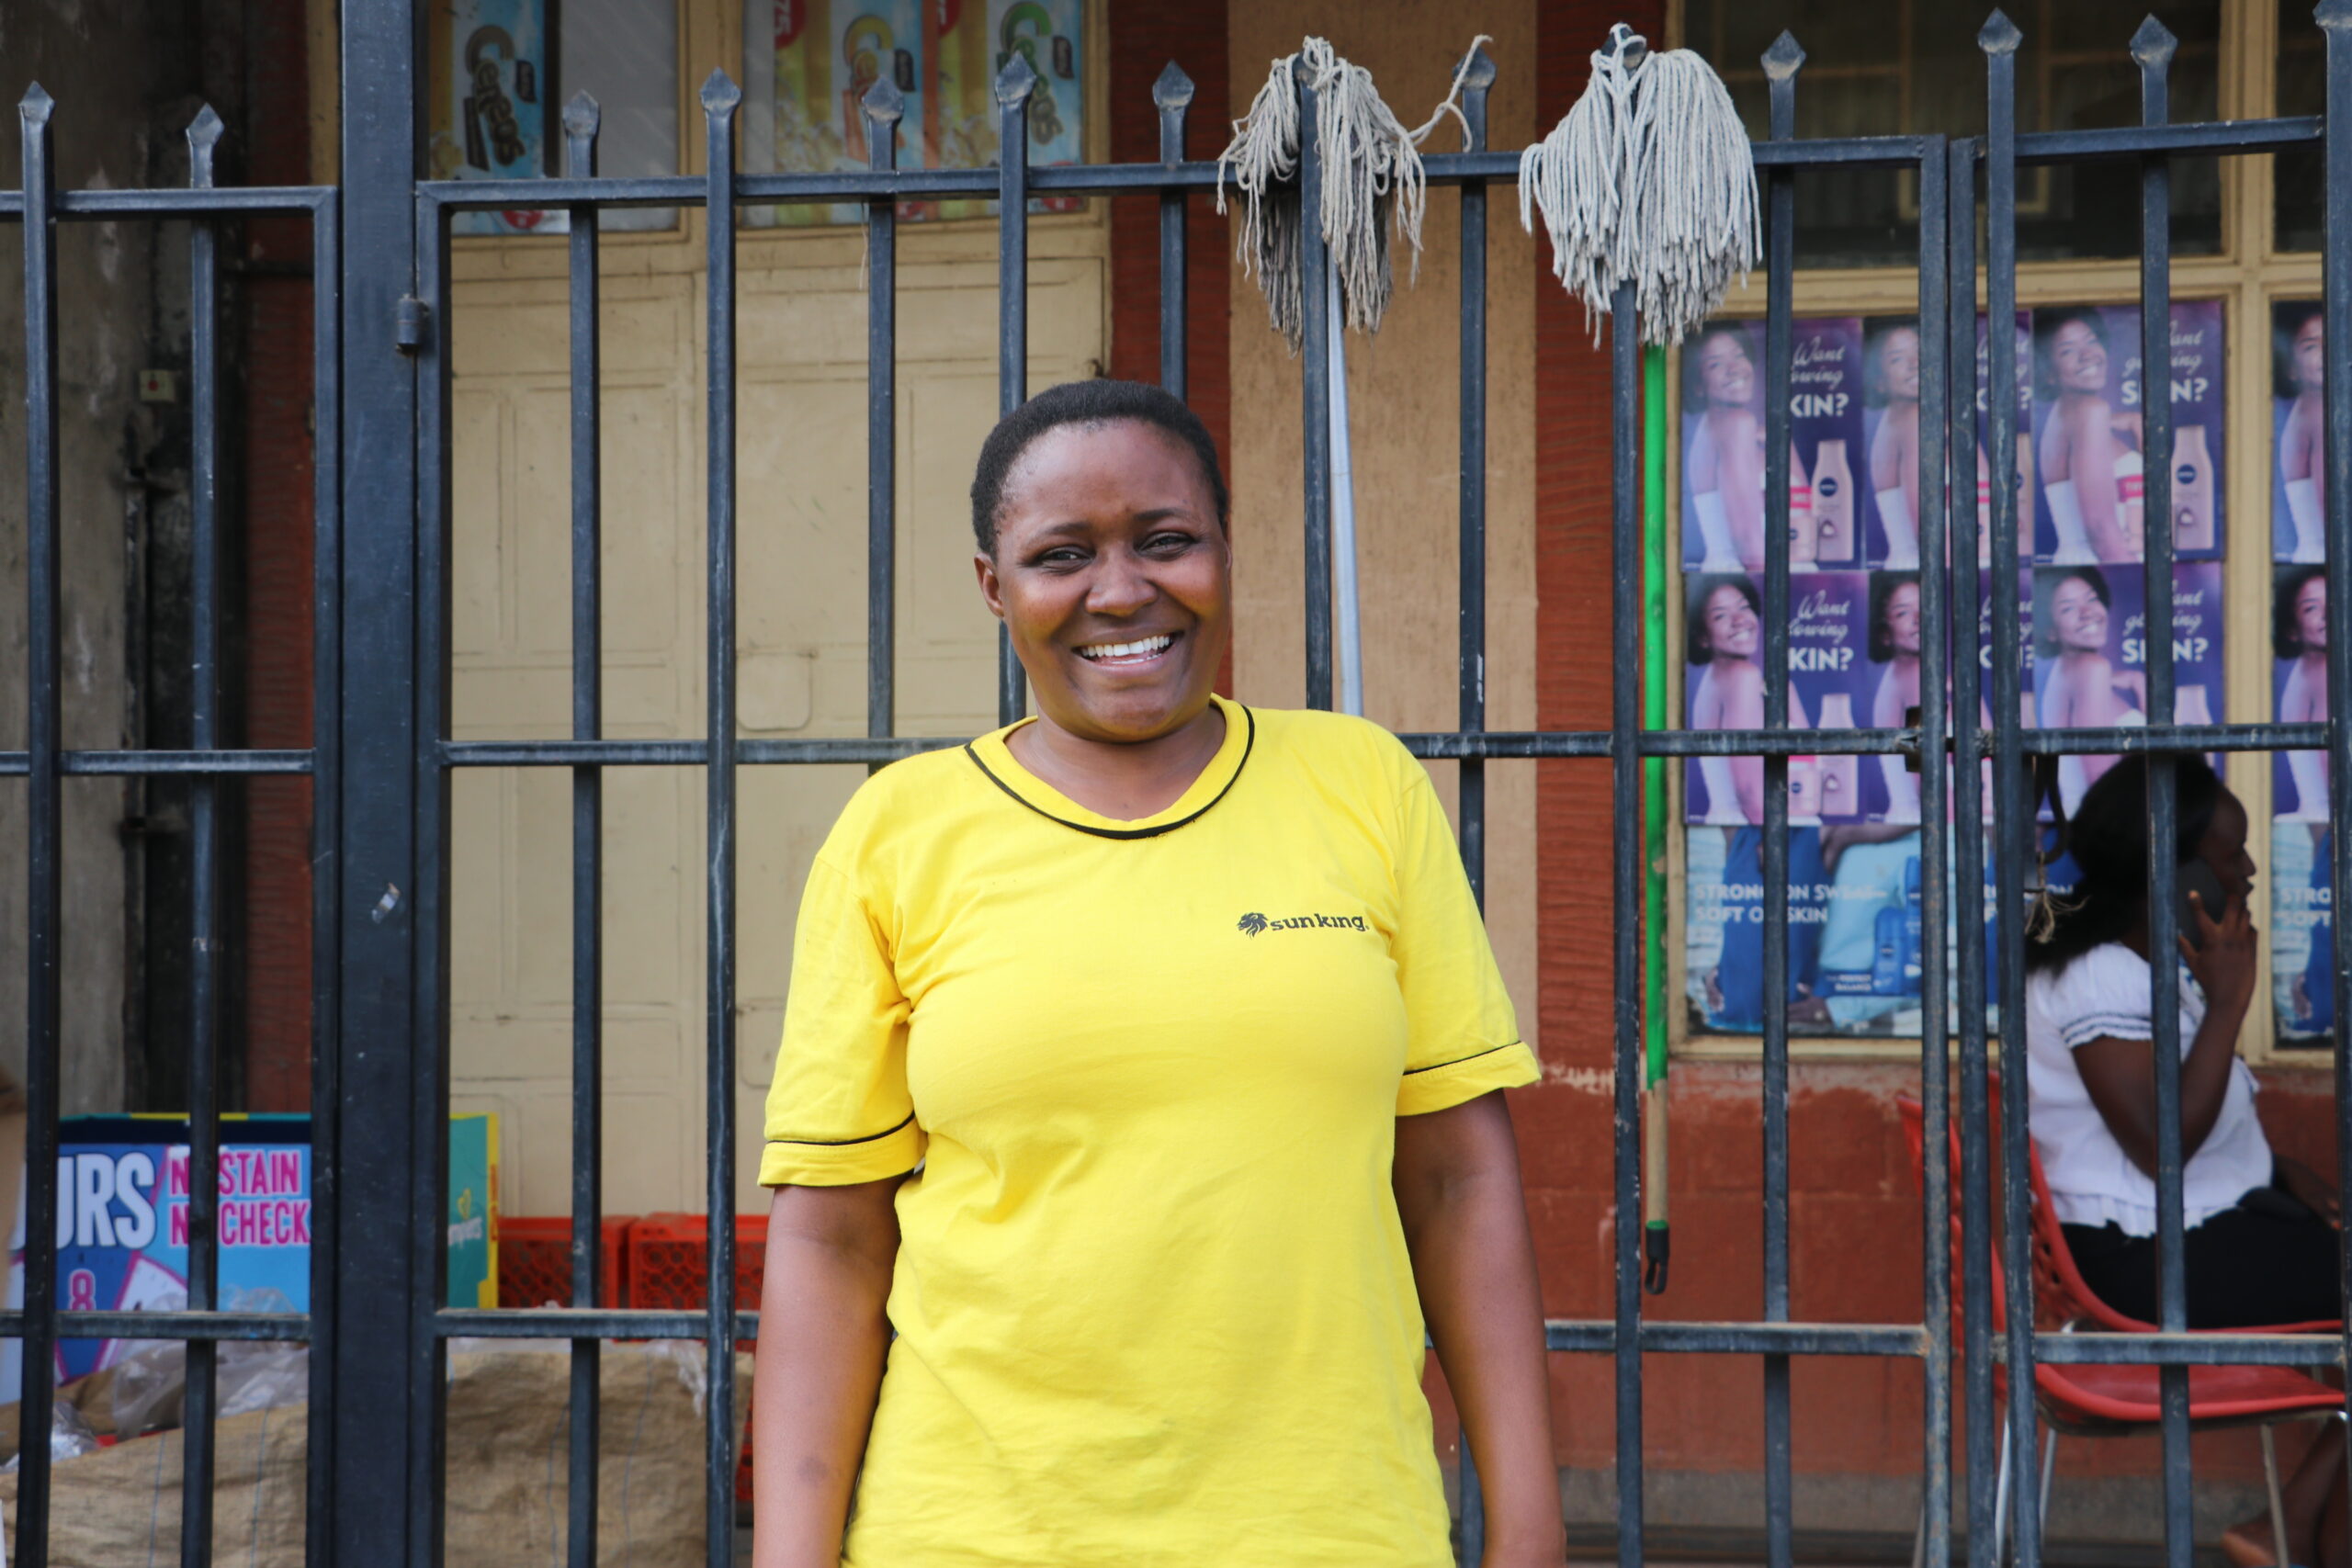 Rebecca is promoting productive uses of energy to enhance livelihoods in her community